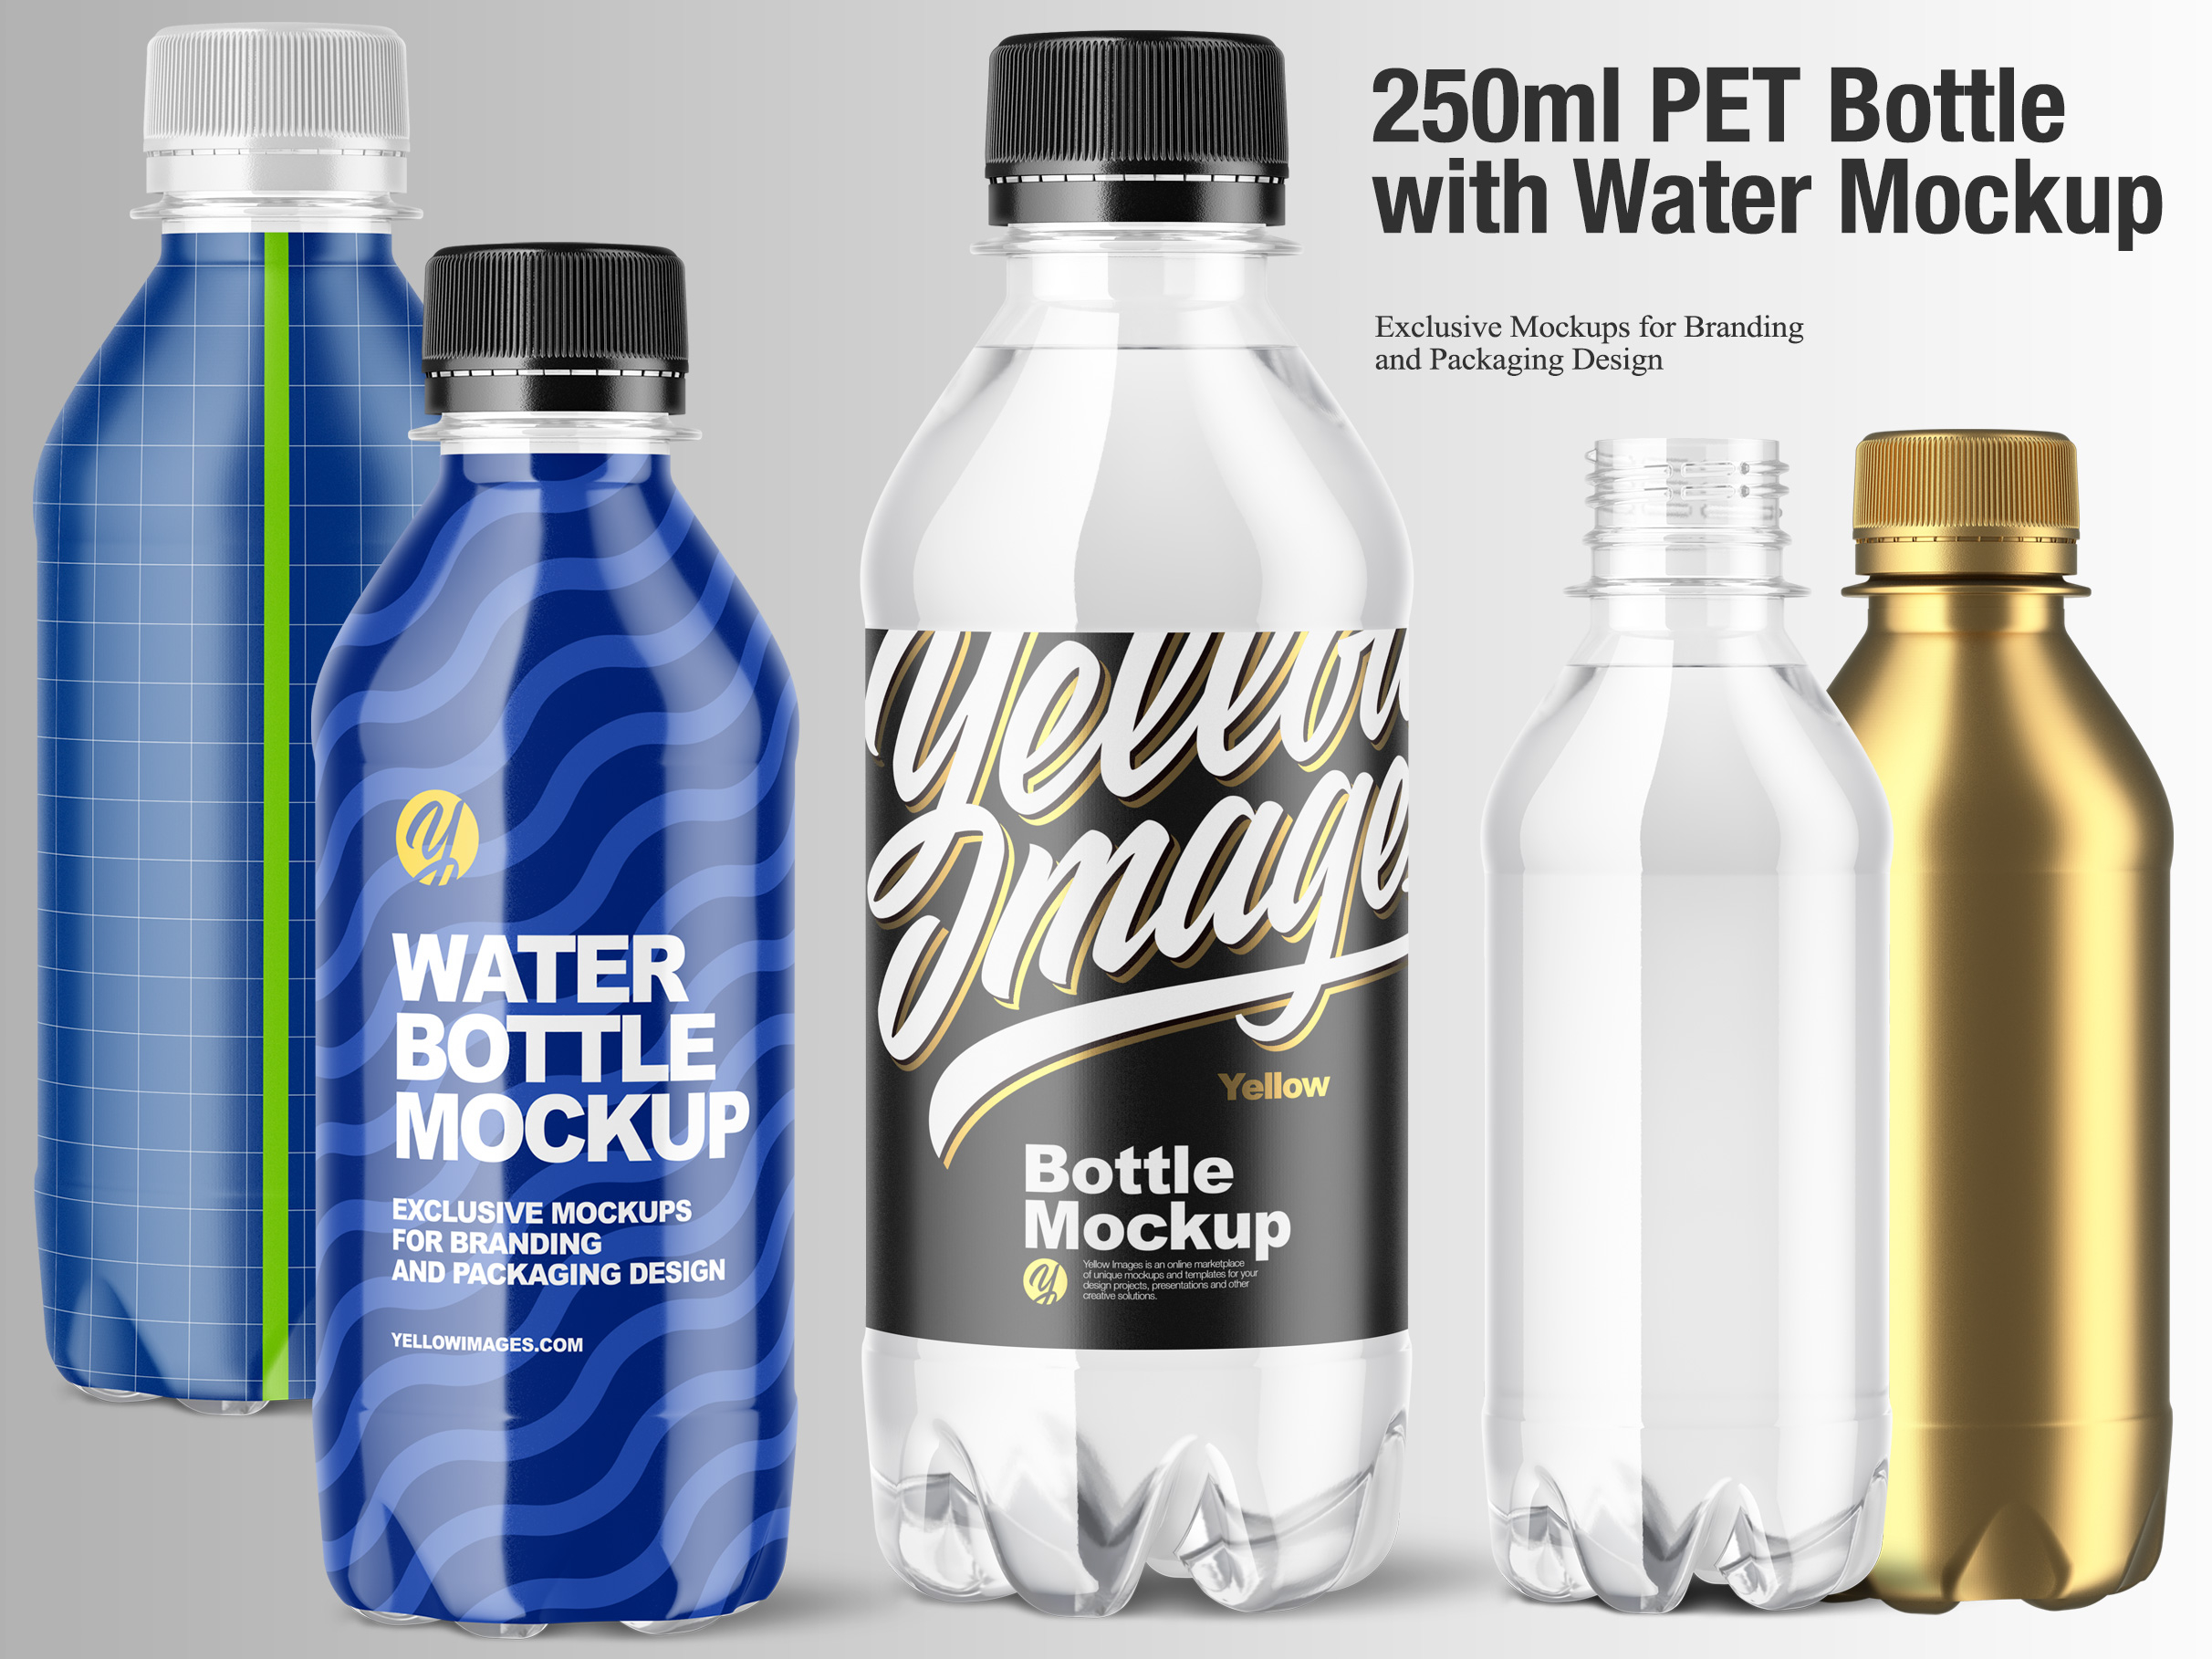 Download 250ml Pet Bottle With Water Mockup By Oleksandr Hlubokyi On Dribbble PSD Mockup Templates